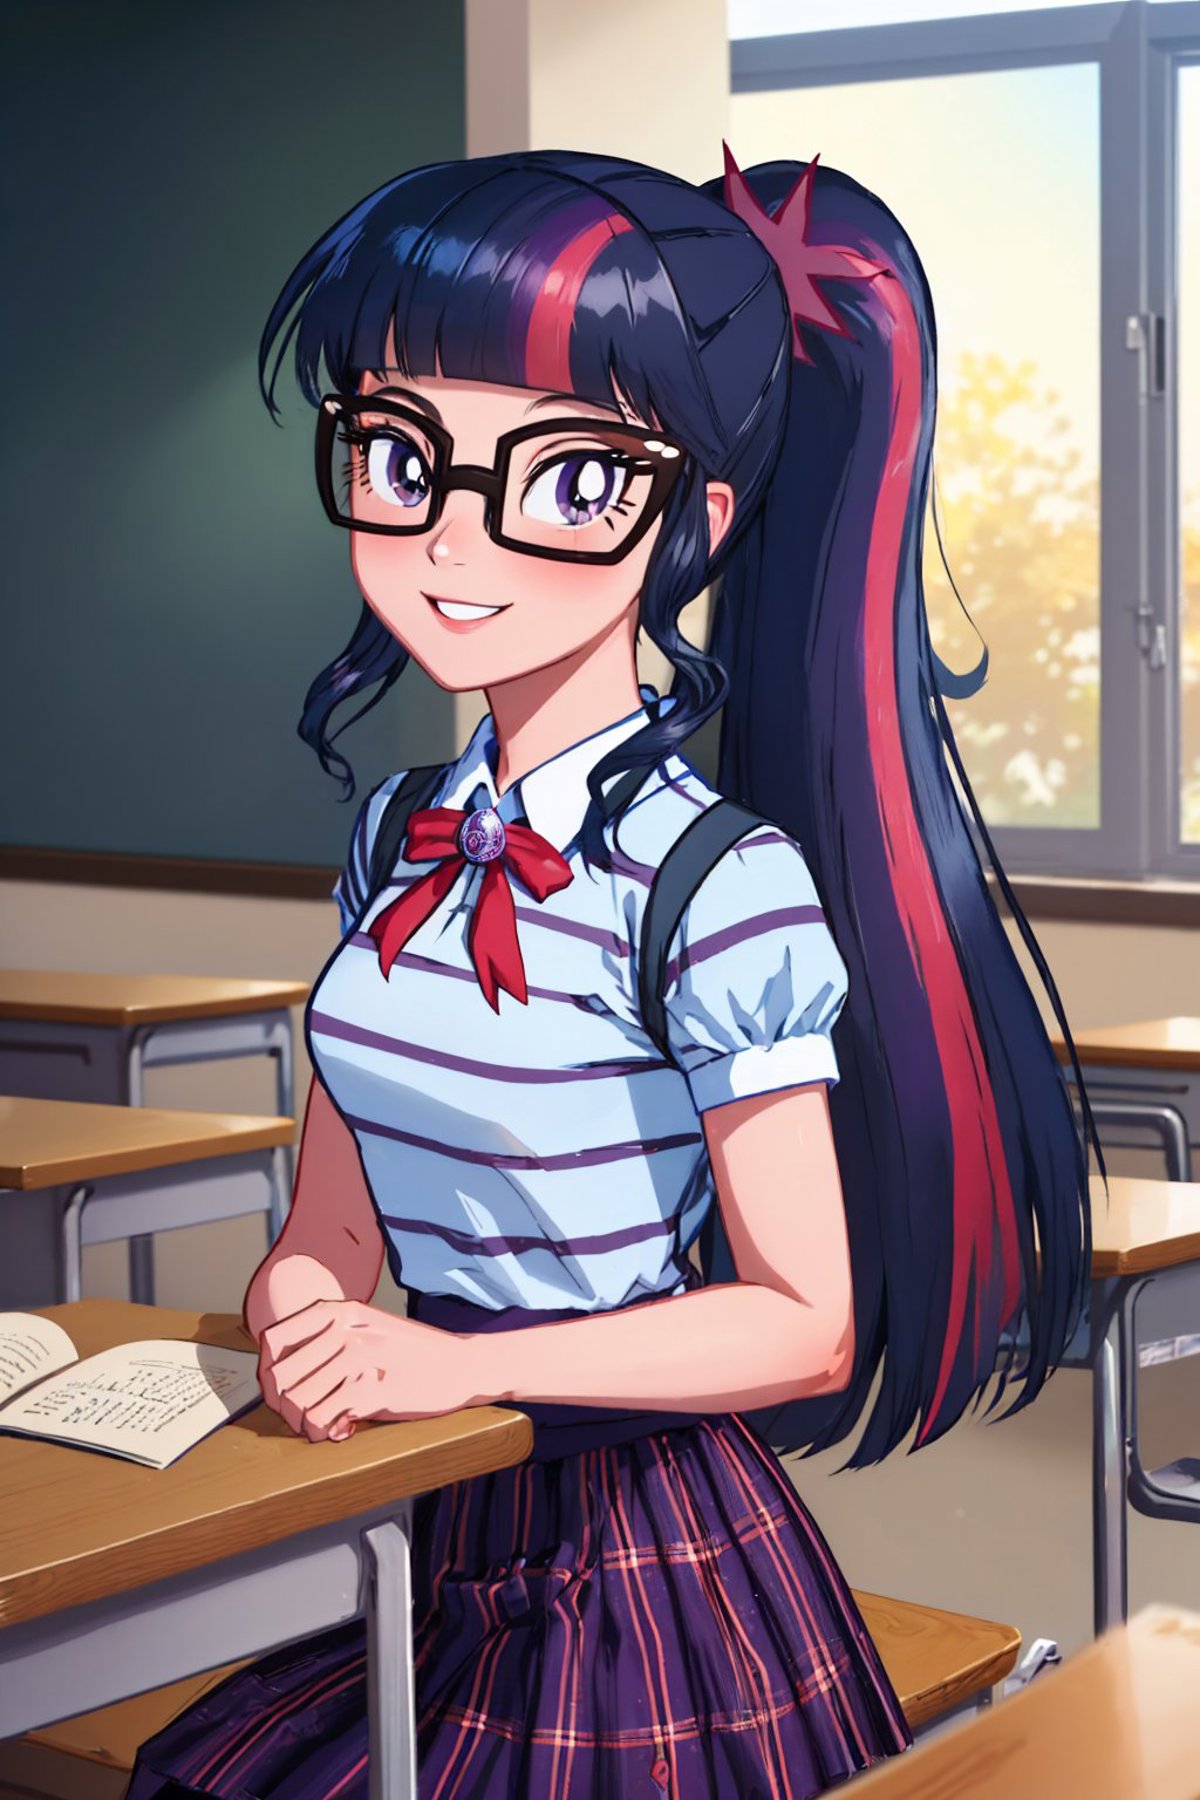 Twilight Sparkle | My Little Pony / Equestria Girls image by justTNP